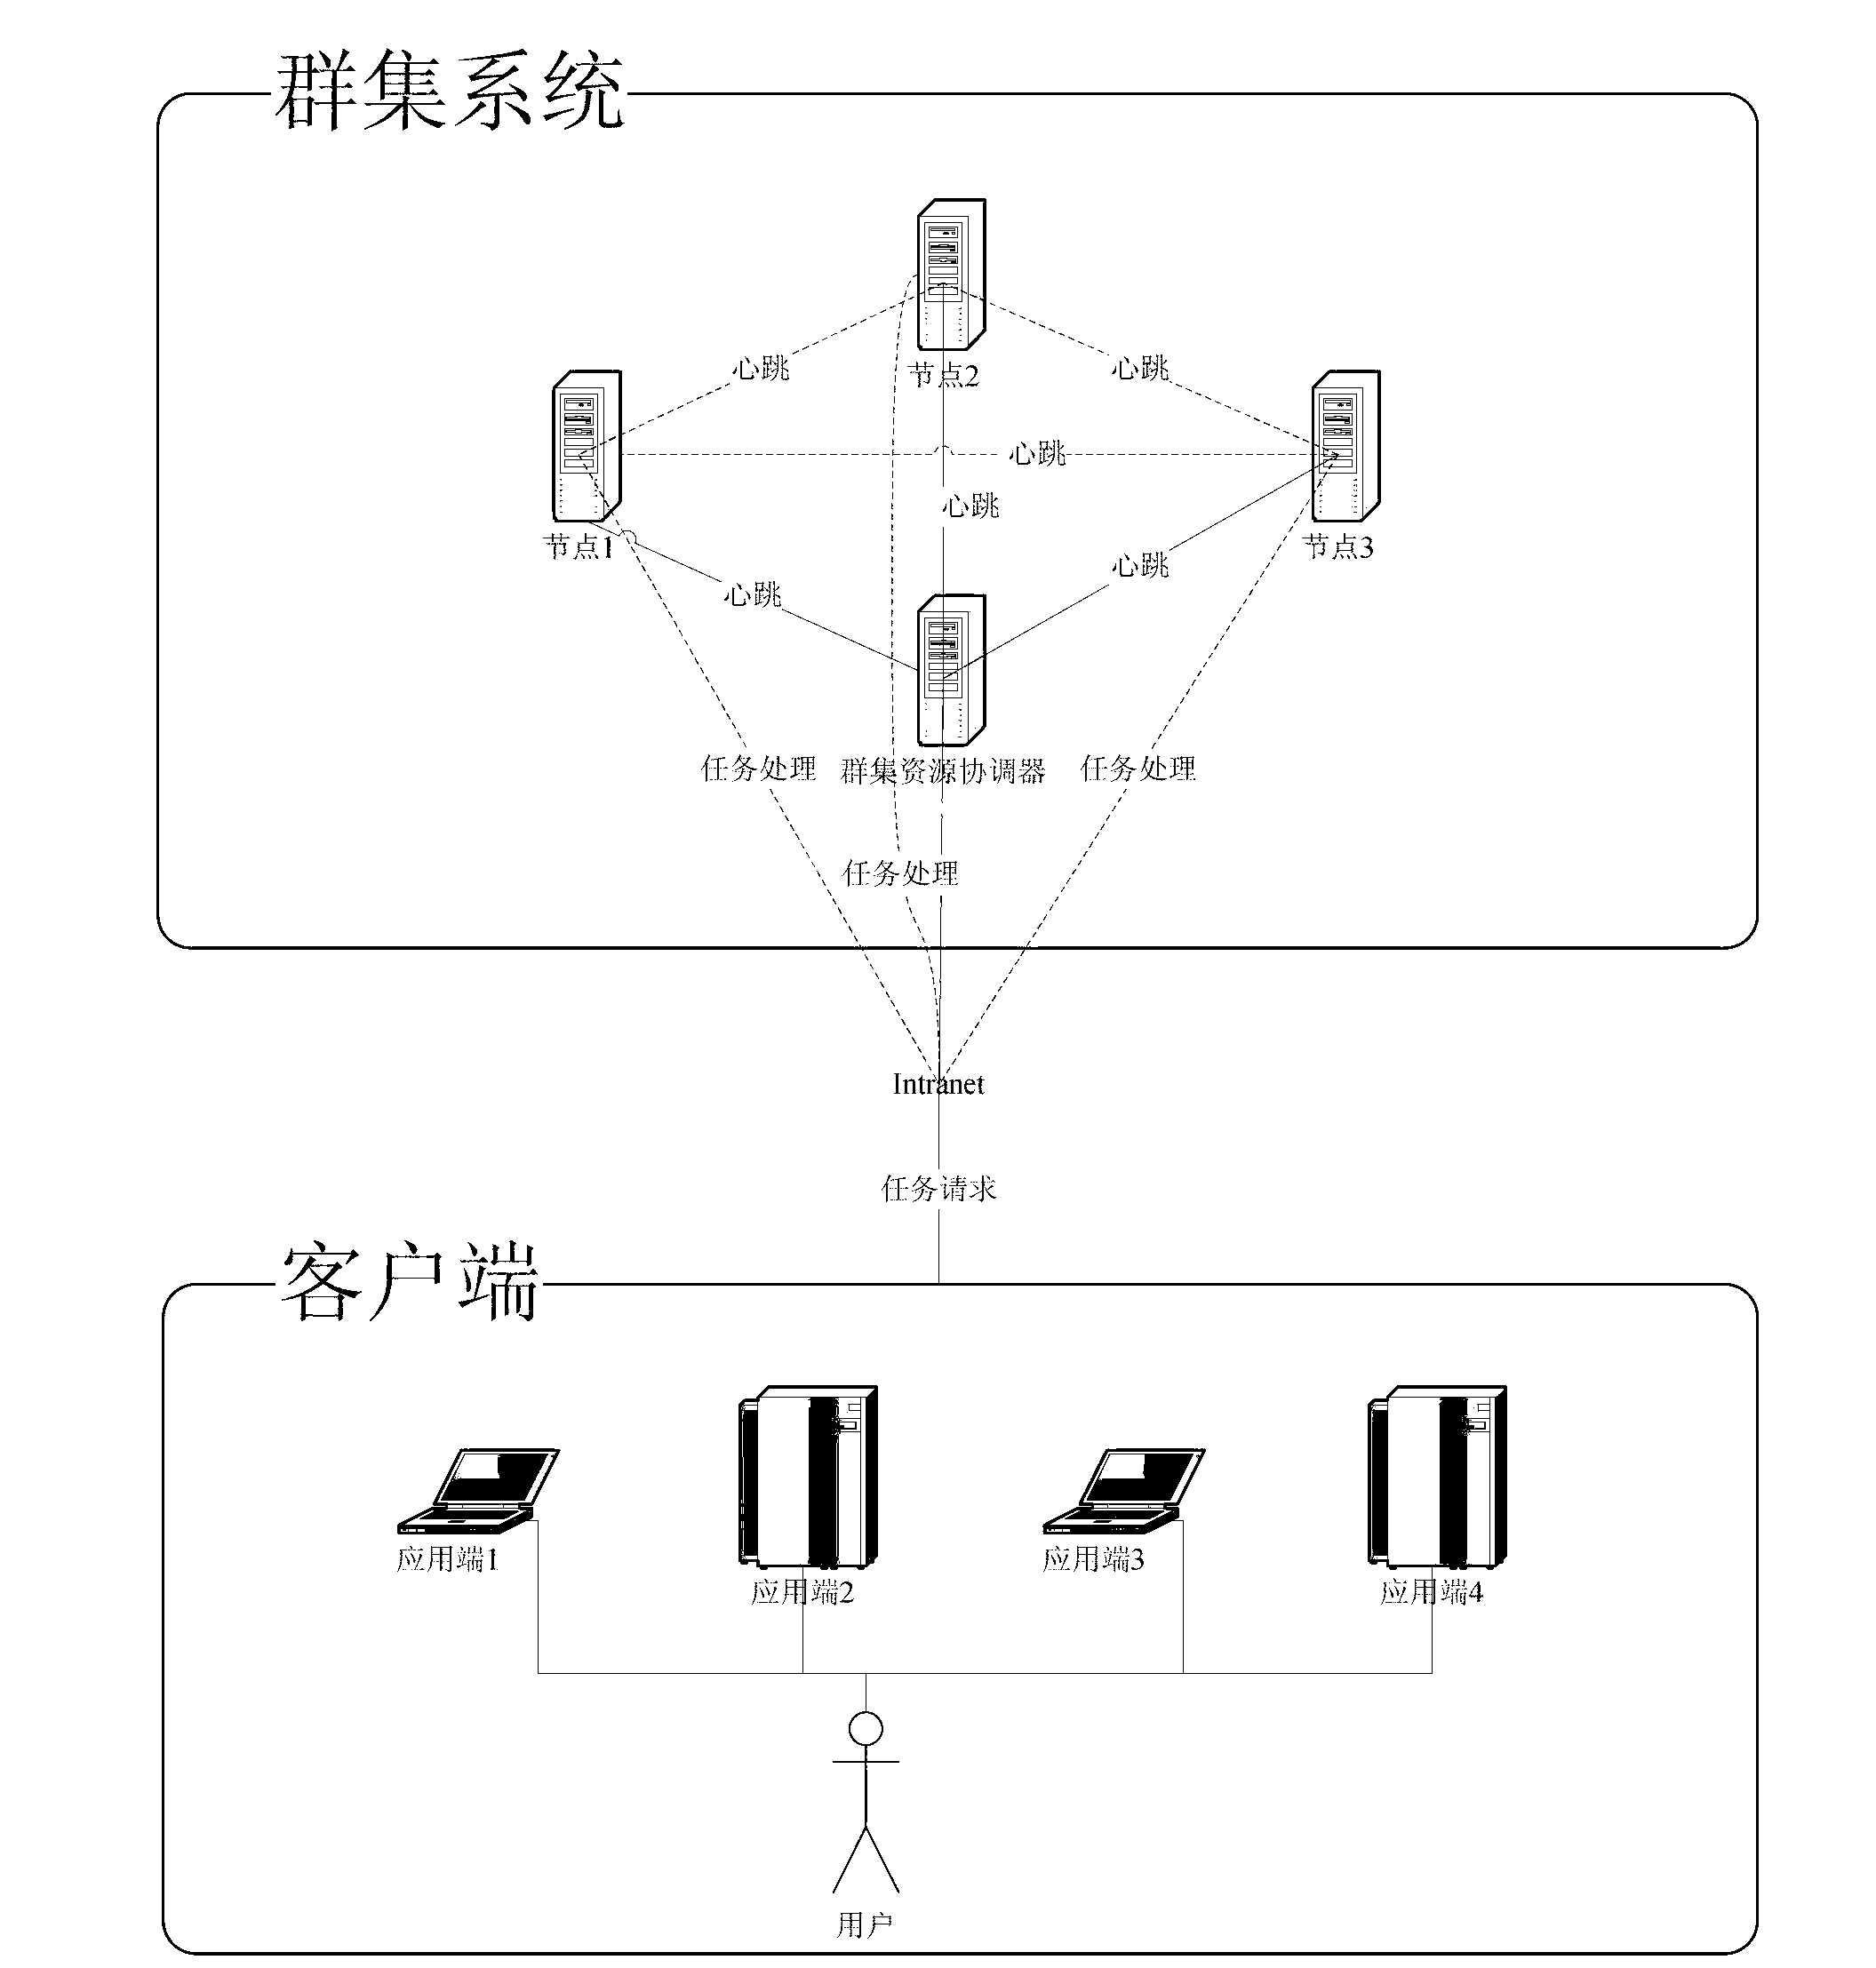 Cluster resource control method for achieving dynamic load balance, fault diagnosis and failover